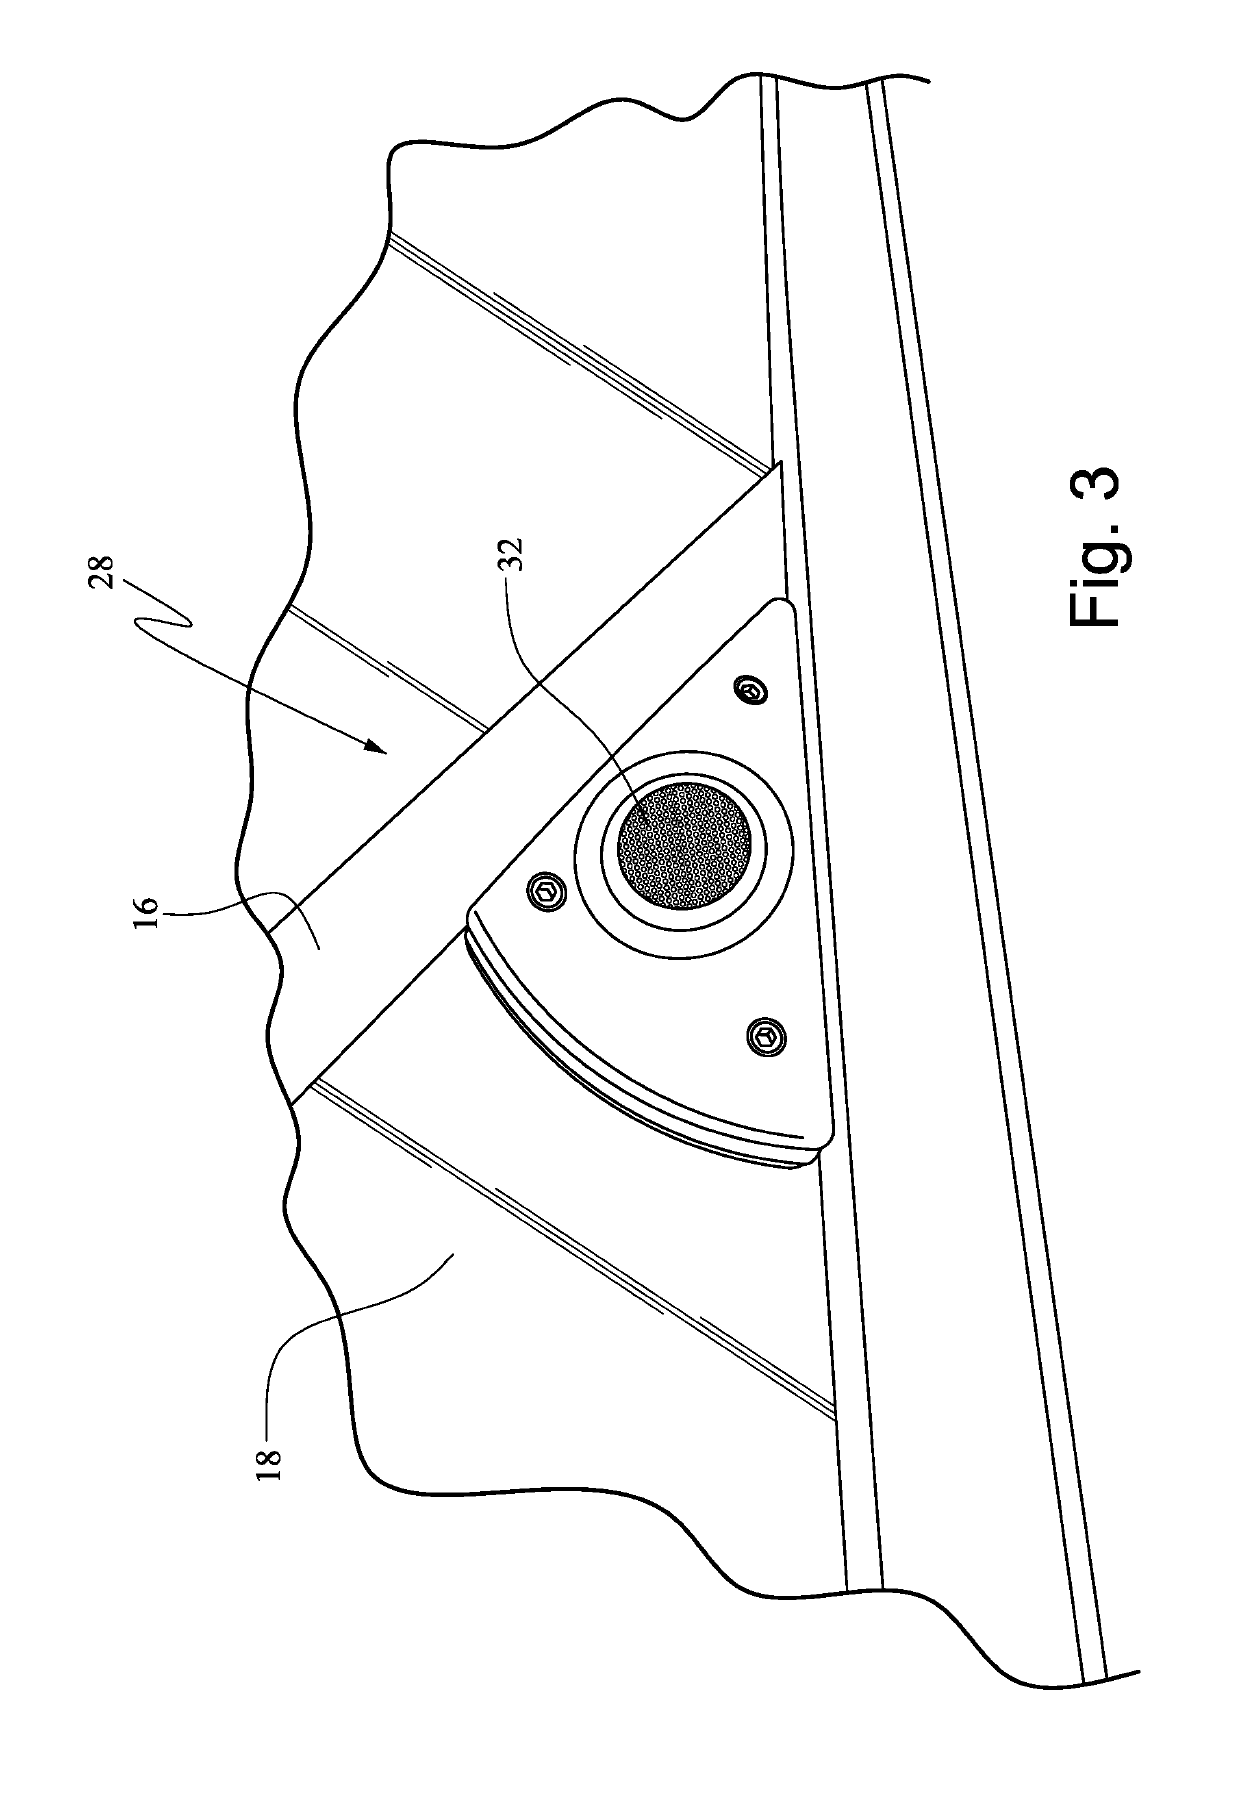 Boat windshield with integrated audio system